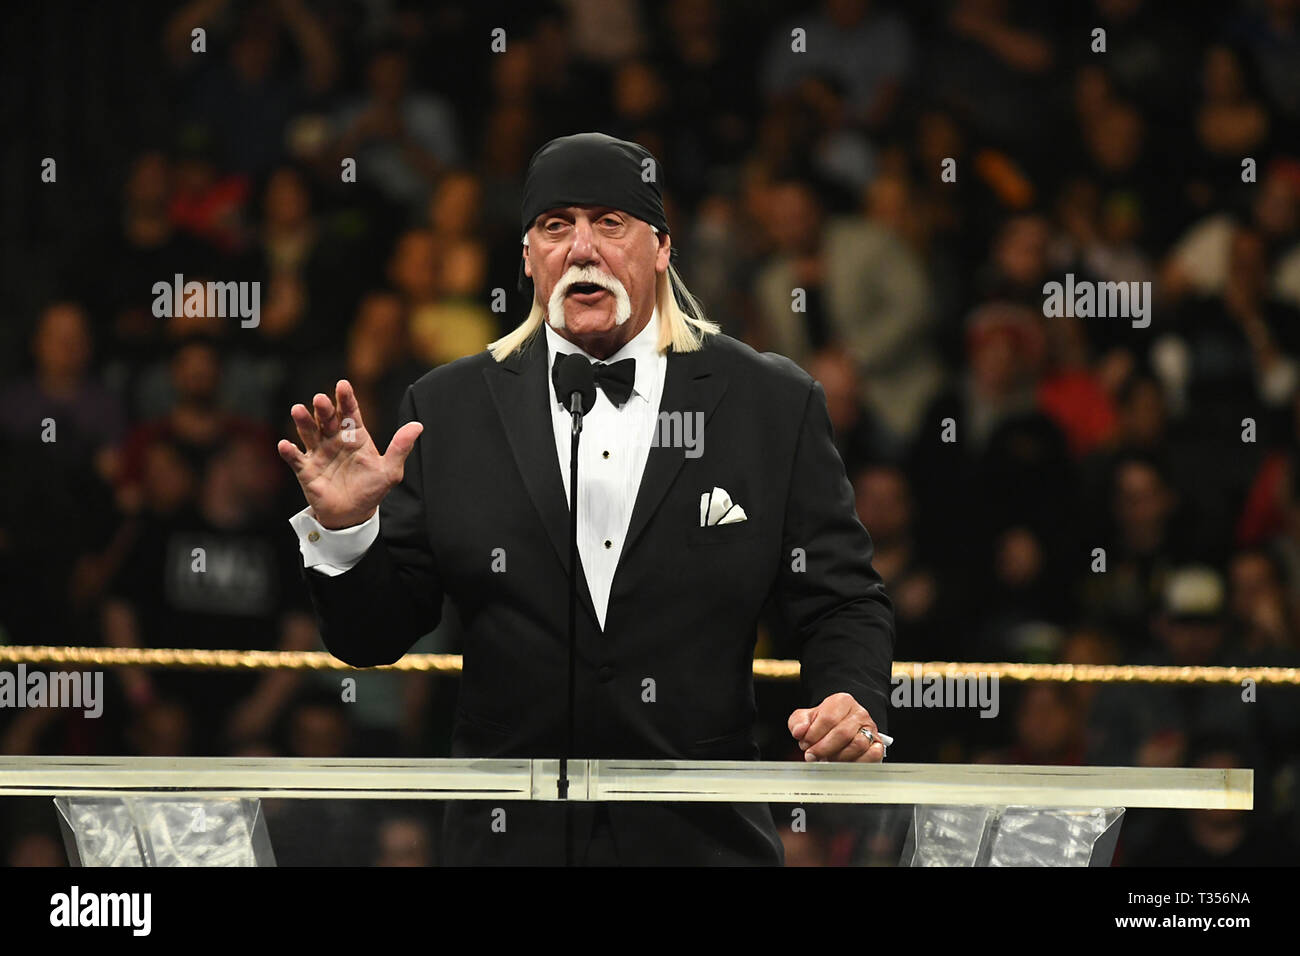 New York, USA. 6th Apr, 2019. Hulk Hogan at the 2019 WWE Hall Of Fame Ceremony at the Barclay's Center in Brooklyn, New York City on April 6, 2019. Credit: George Napolitano/Media Punch/Alamy Live News Stock Photo